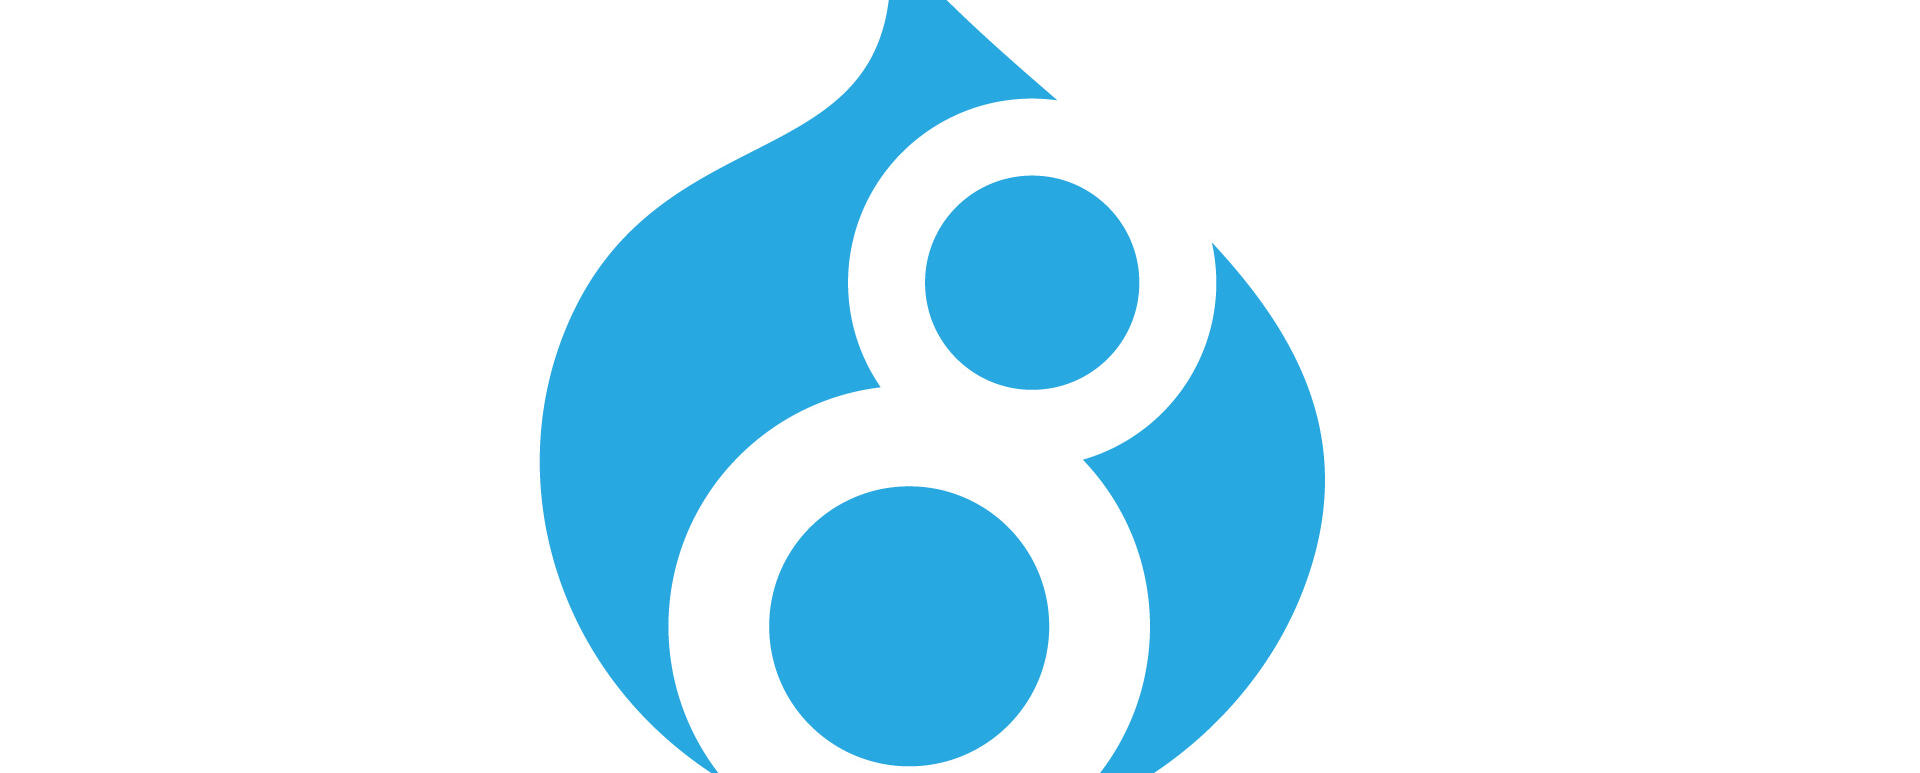 How to enable (install) a module programmatically in Drupal 8